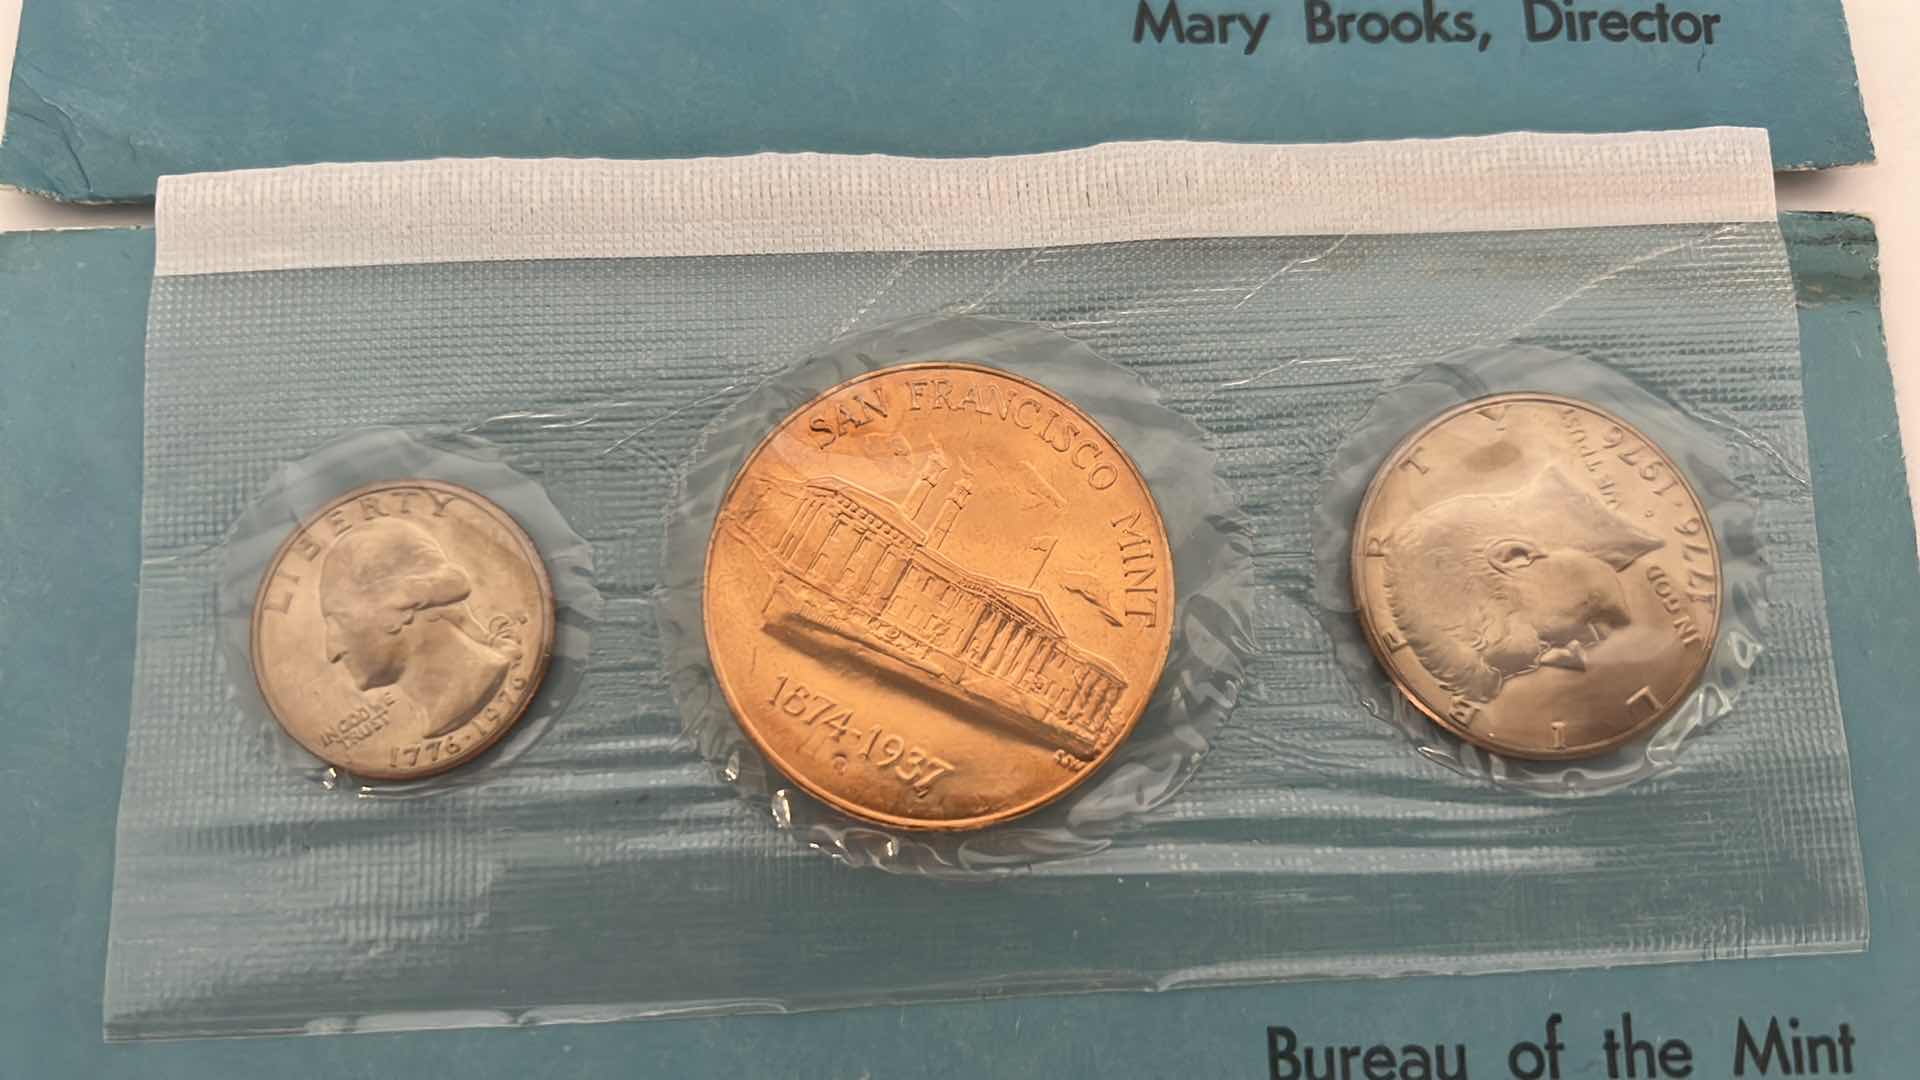 Photo 3 of 3 SETS- UNCIRCULATED BUREAU OF THE MINT MARY BROOKS DIRECTOR COIN COLLECTION